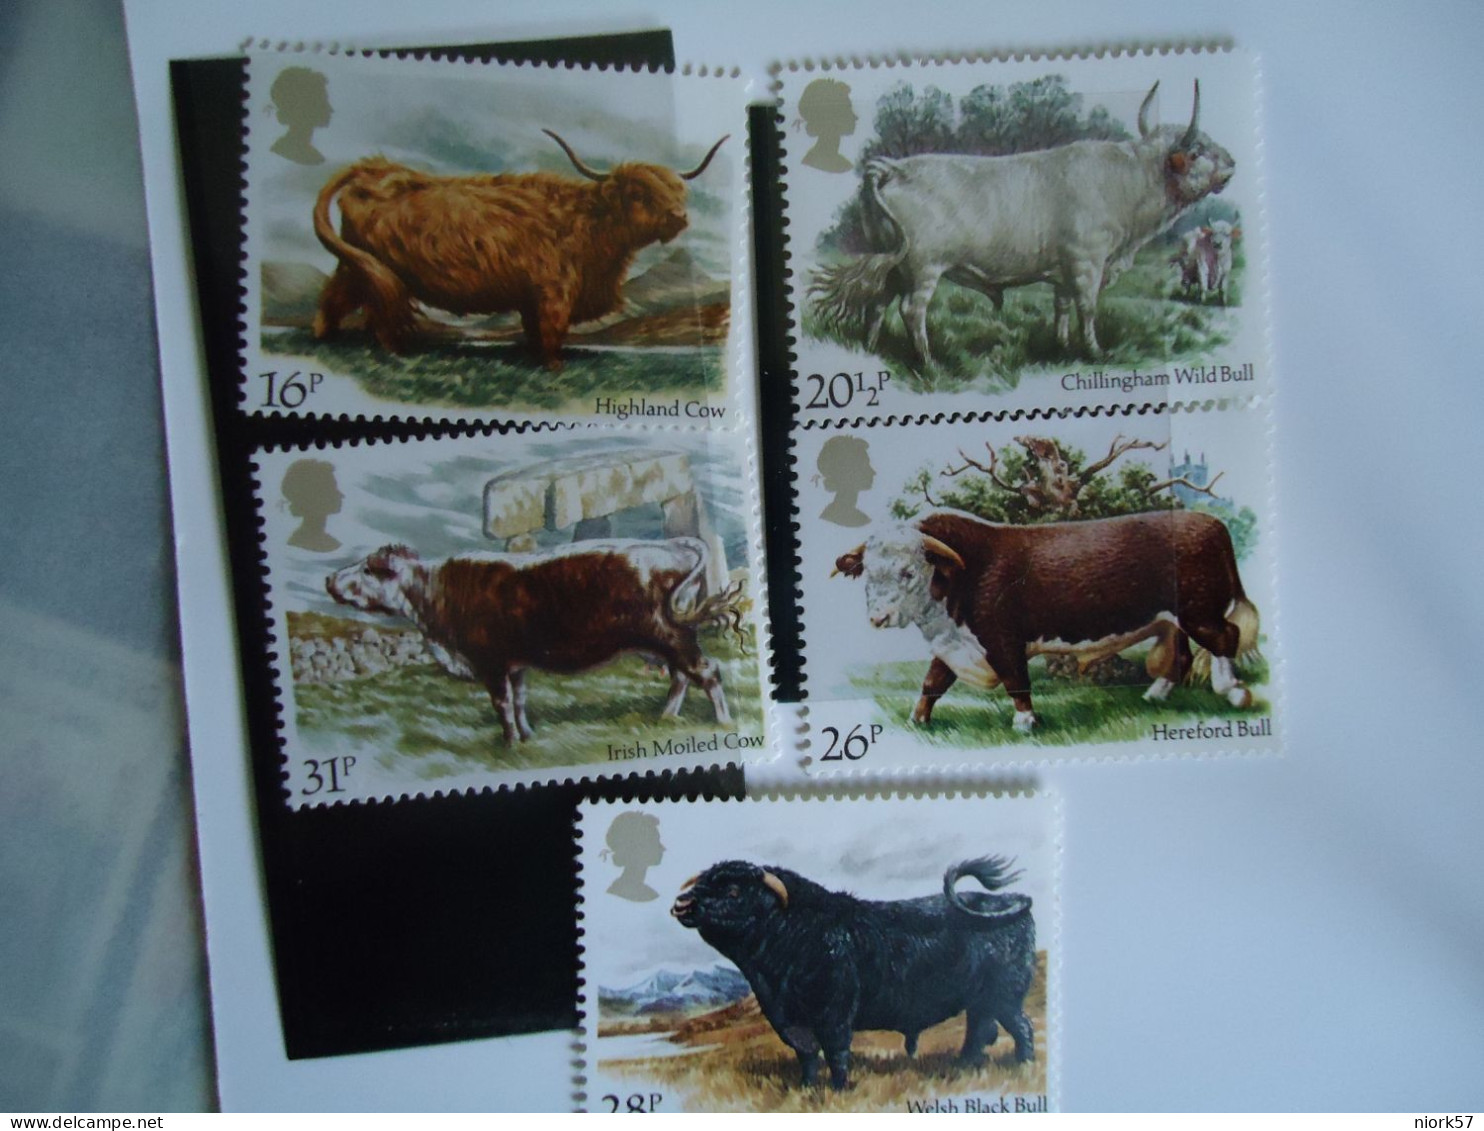 UNITED KINGDOM  MNH  STAMPS  5  ANIMALS  COWS  COW - Vacas